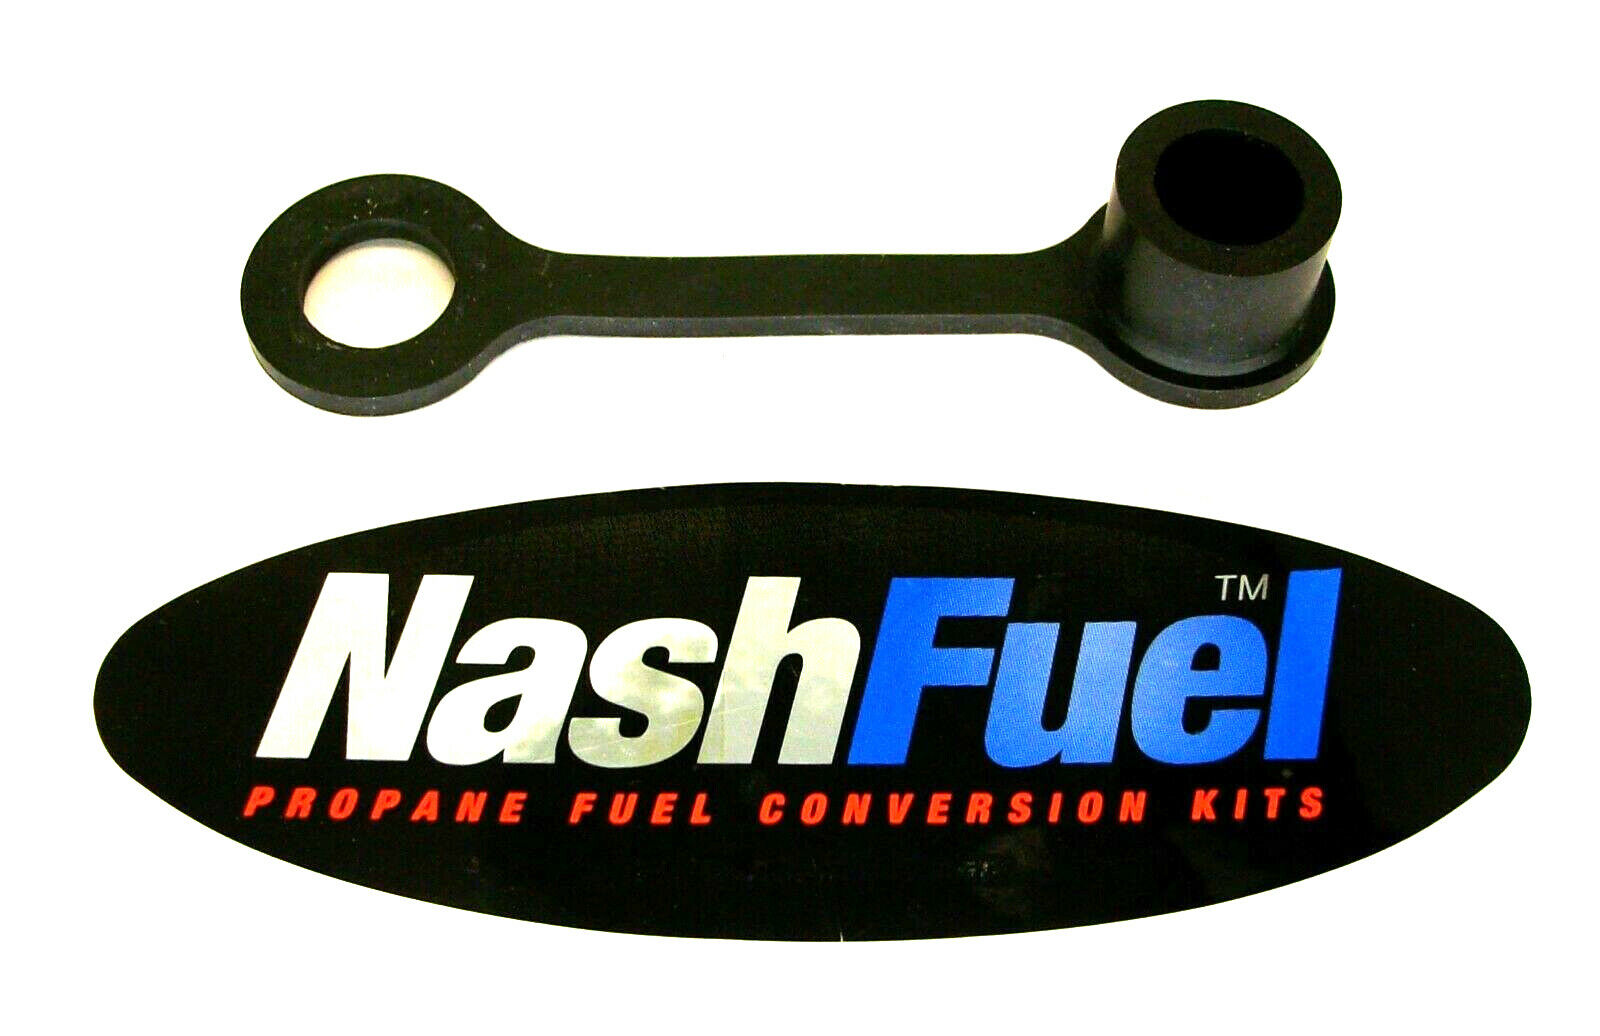 DUST CAP COVER 3600 PSI CNG QUICK CONNECT FUEL FAST FILL NOZZLE NGV1 OPW LB36